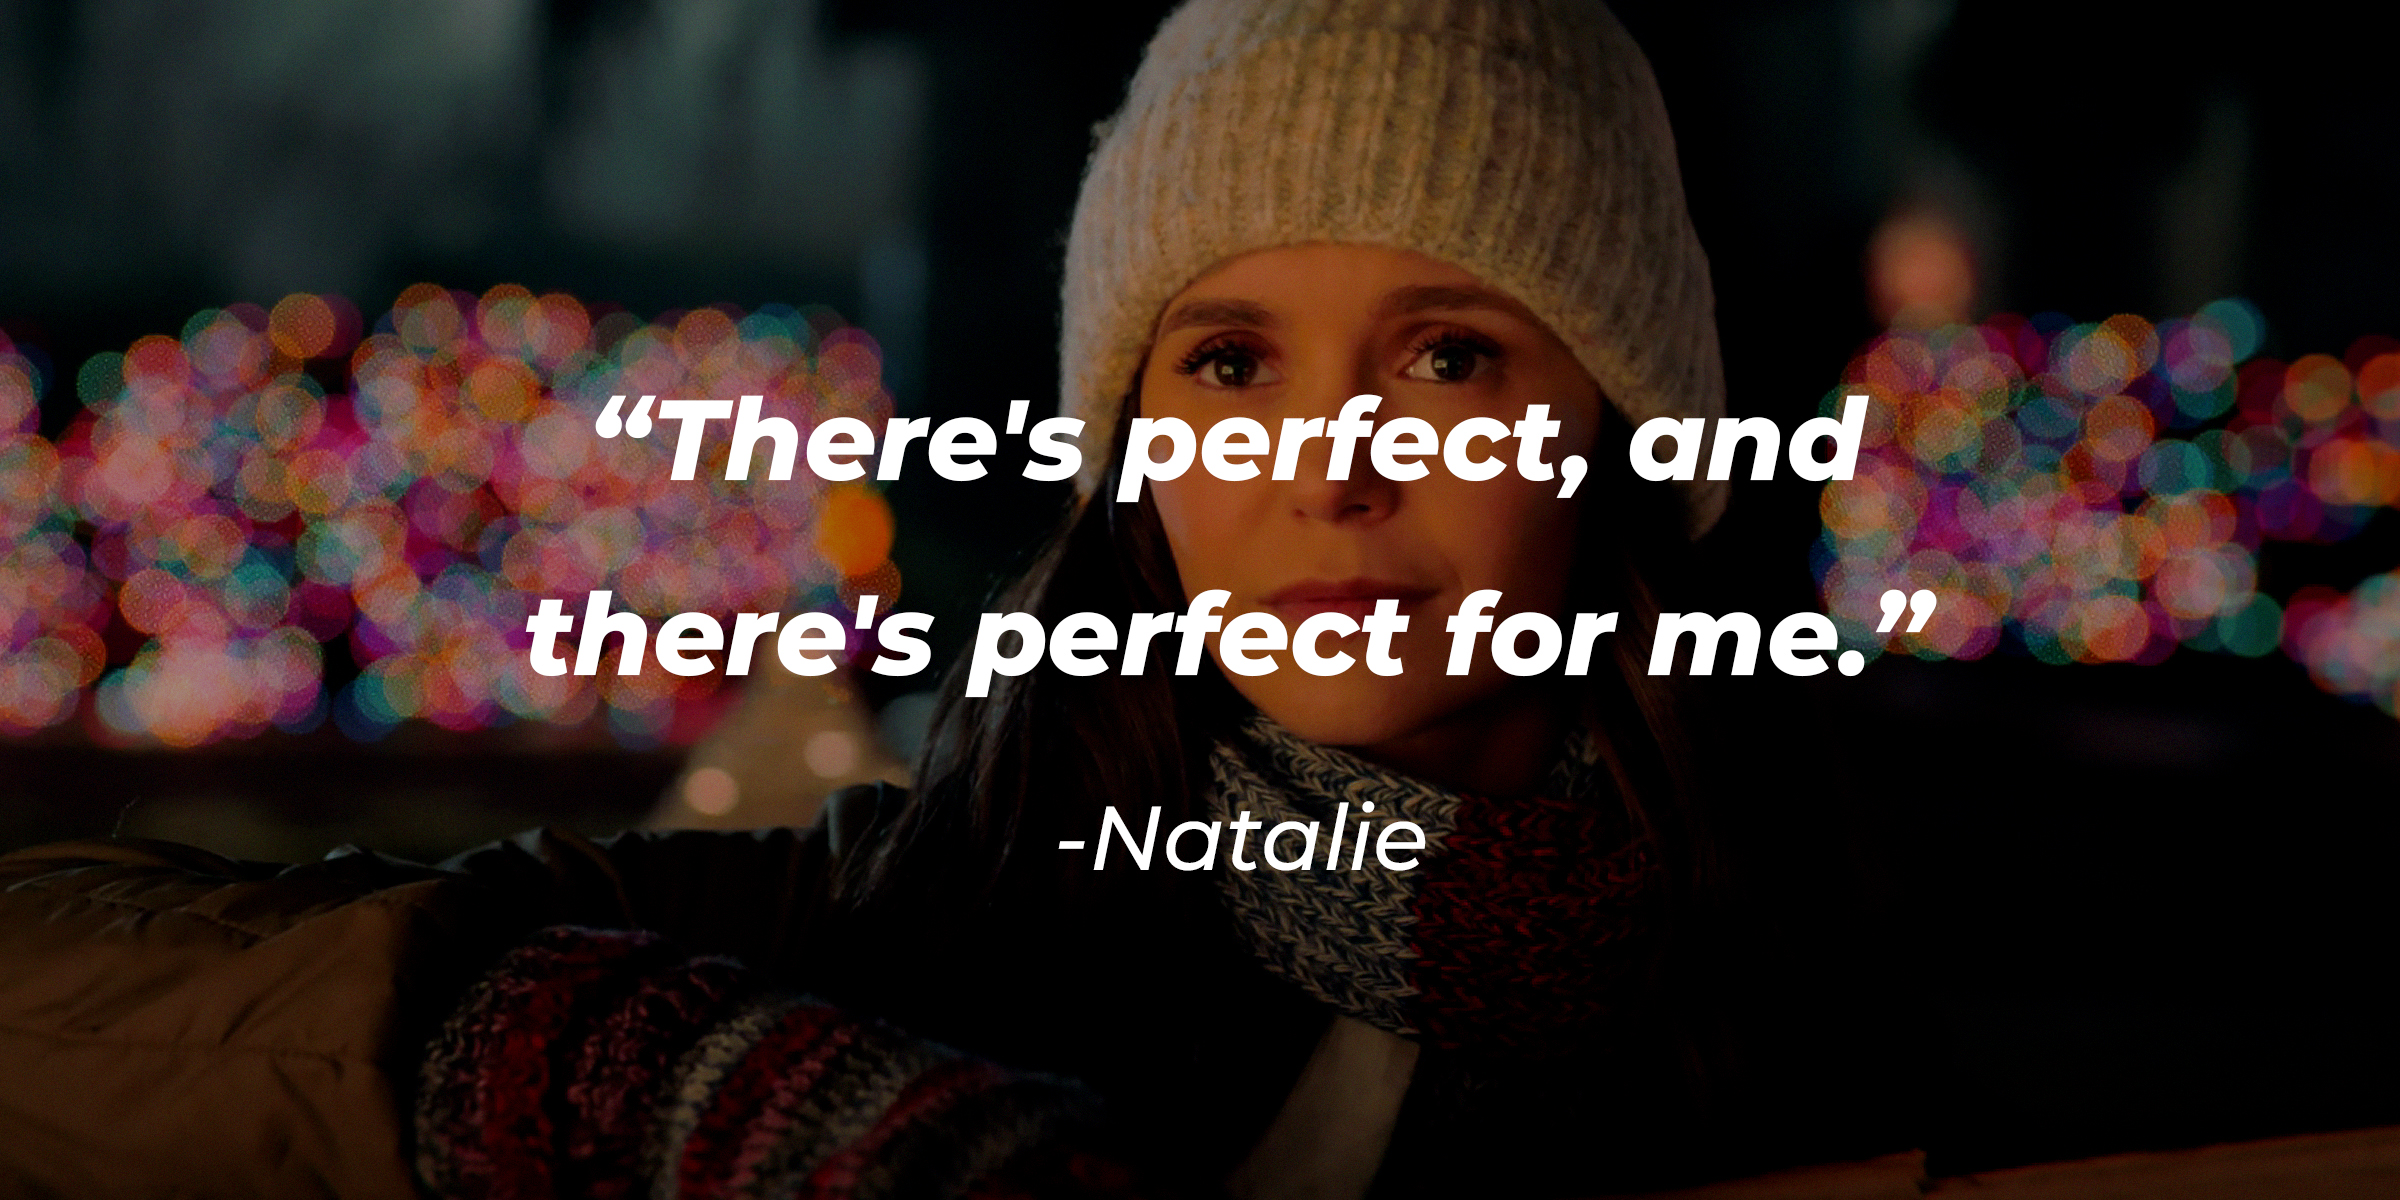 Natalie, with her quote: “There's perfect, and there's perfect for me." | Source: youtube.com/stillwatchingnetflix